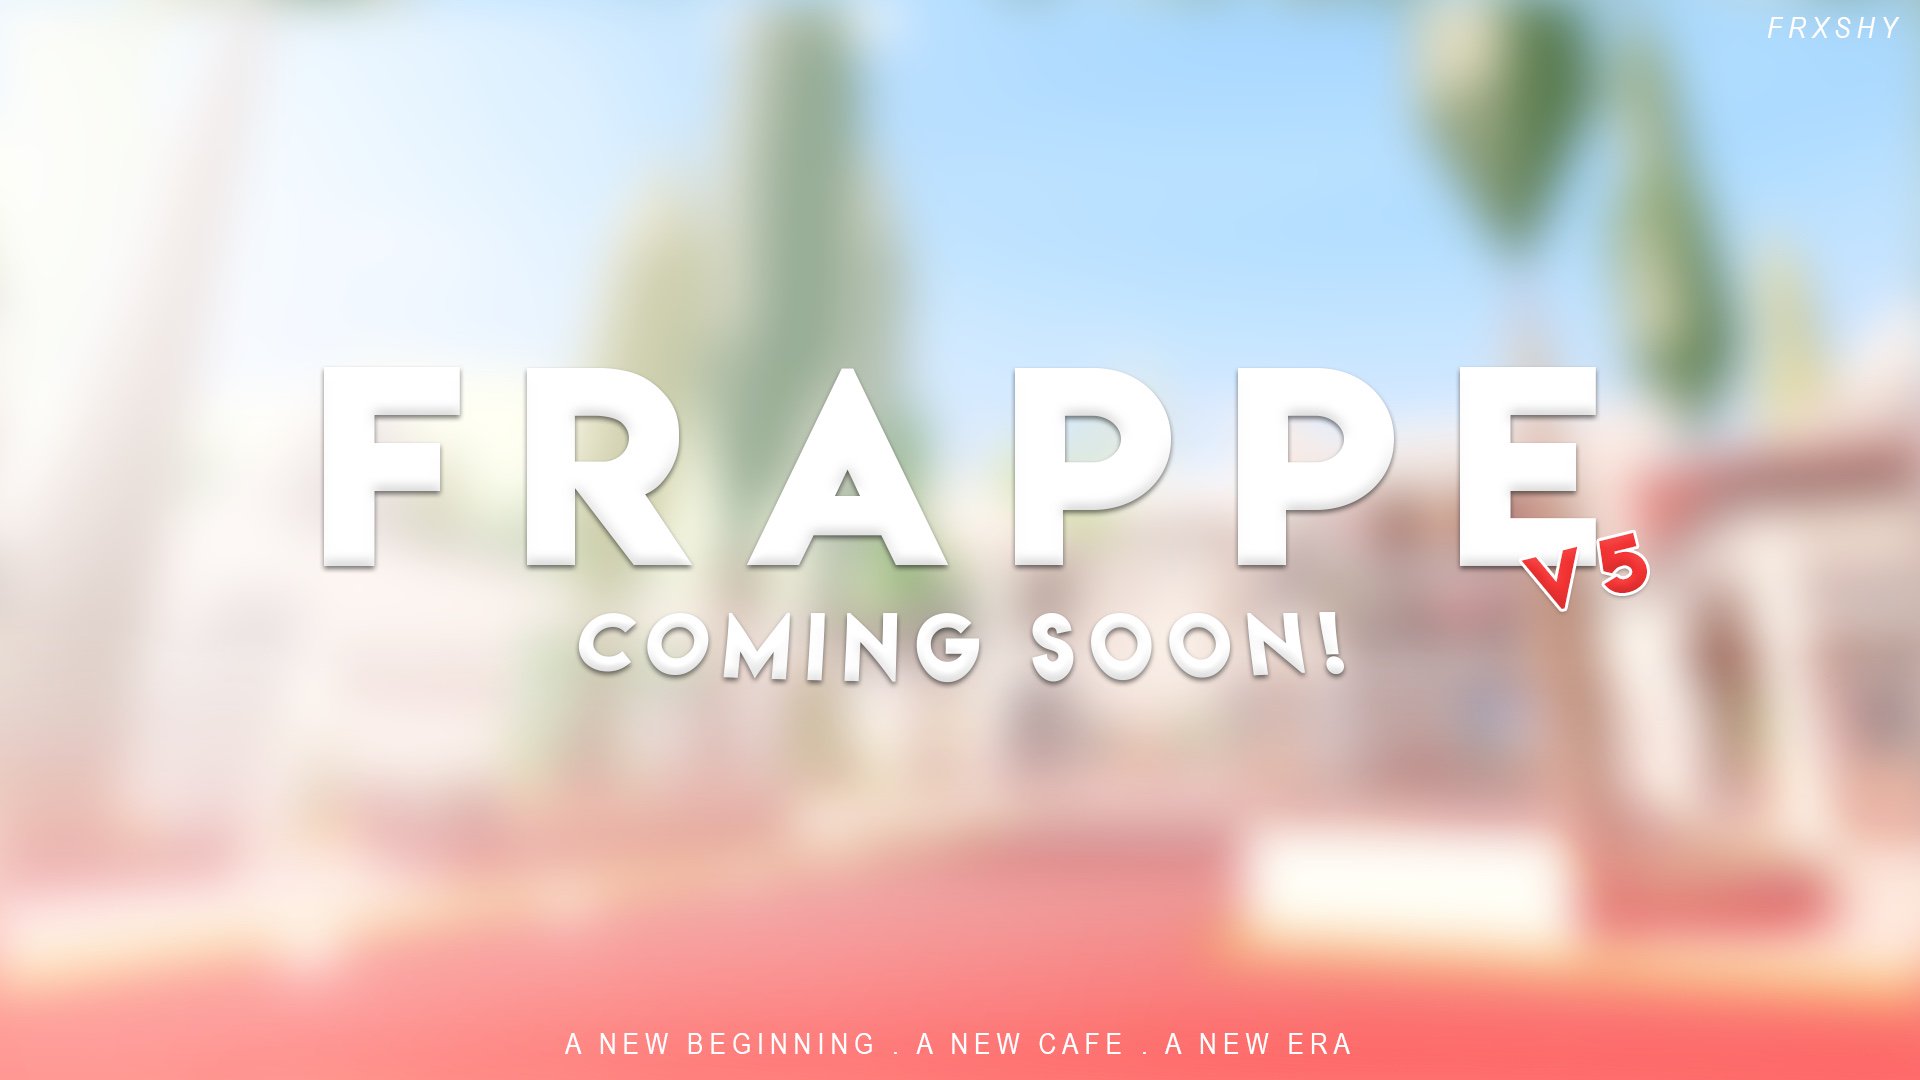 Frappe On Twitter It S Finally Here Frappe V5 More Information Soon To Follow - frappe cafe roblox